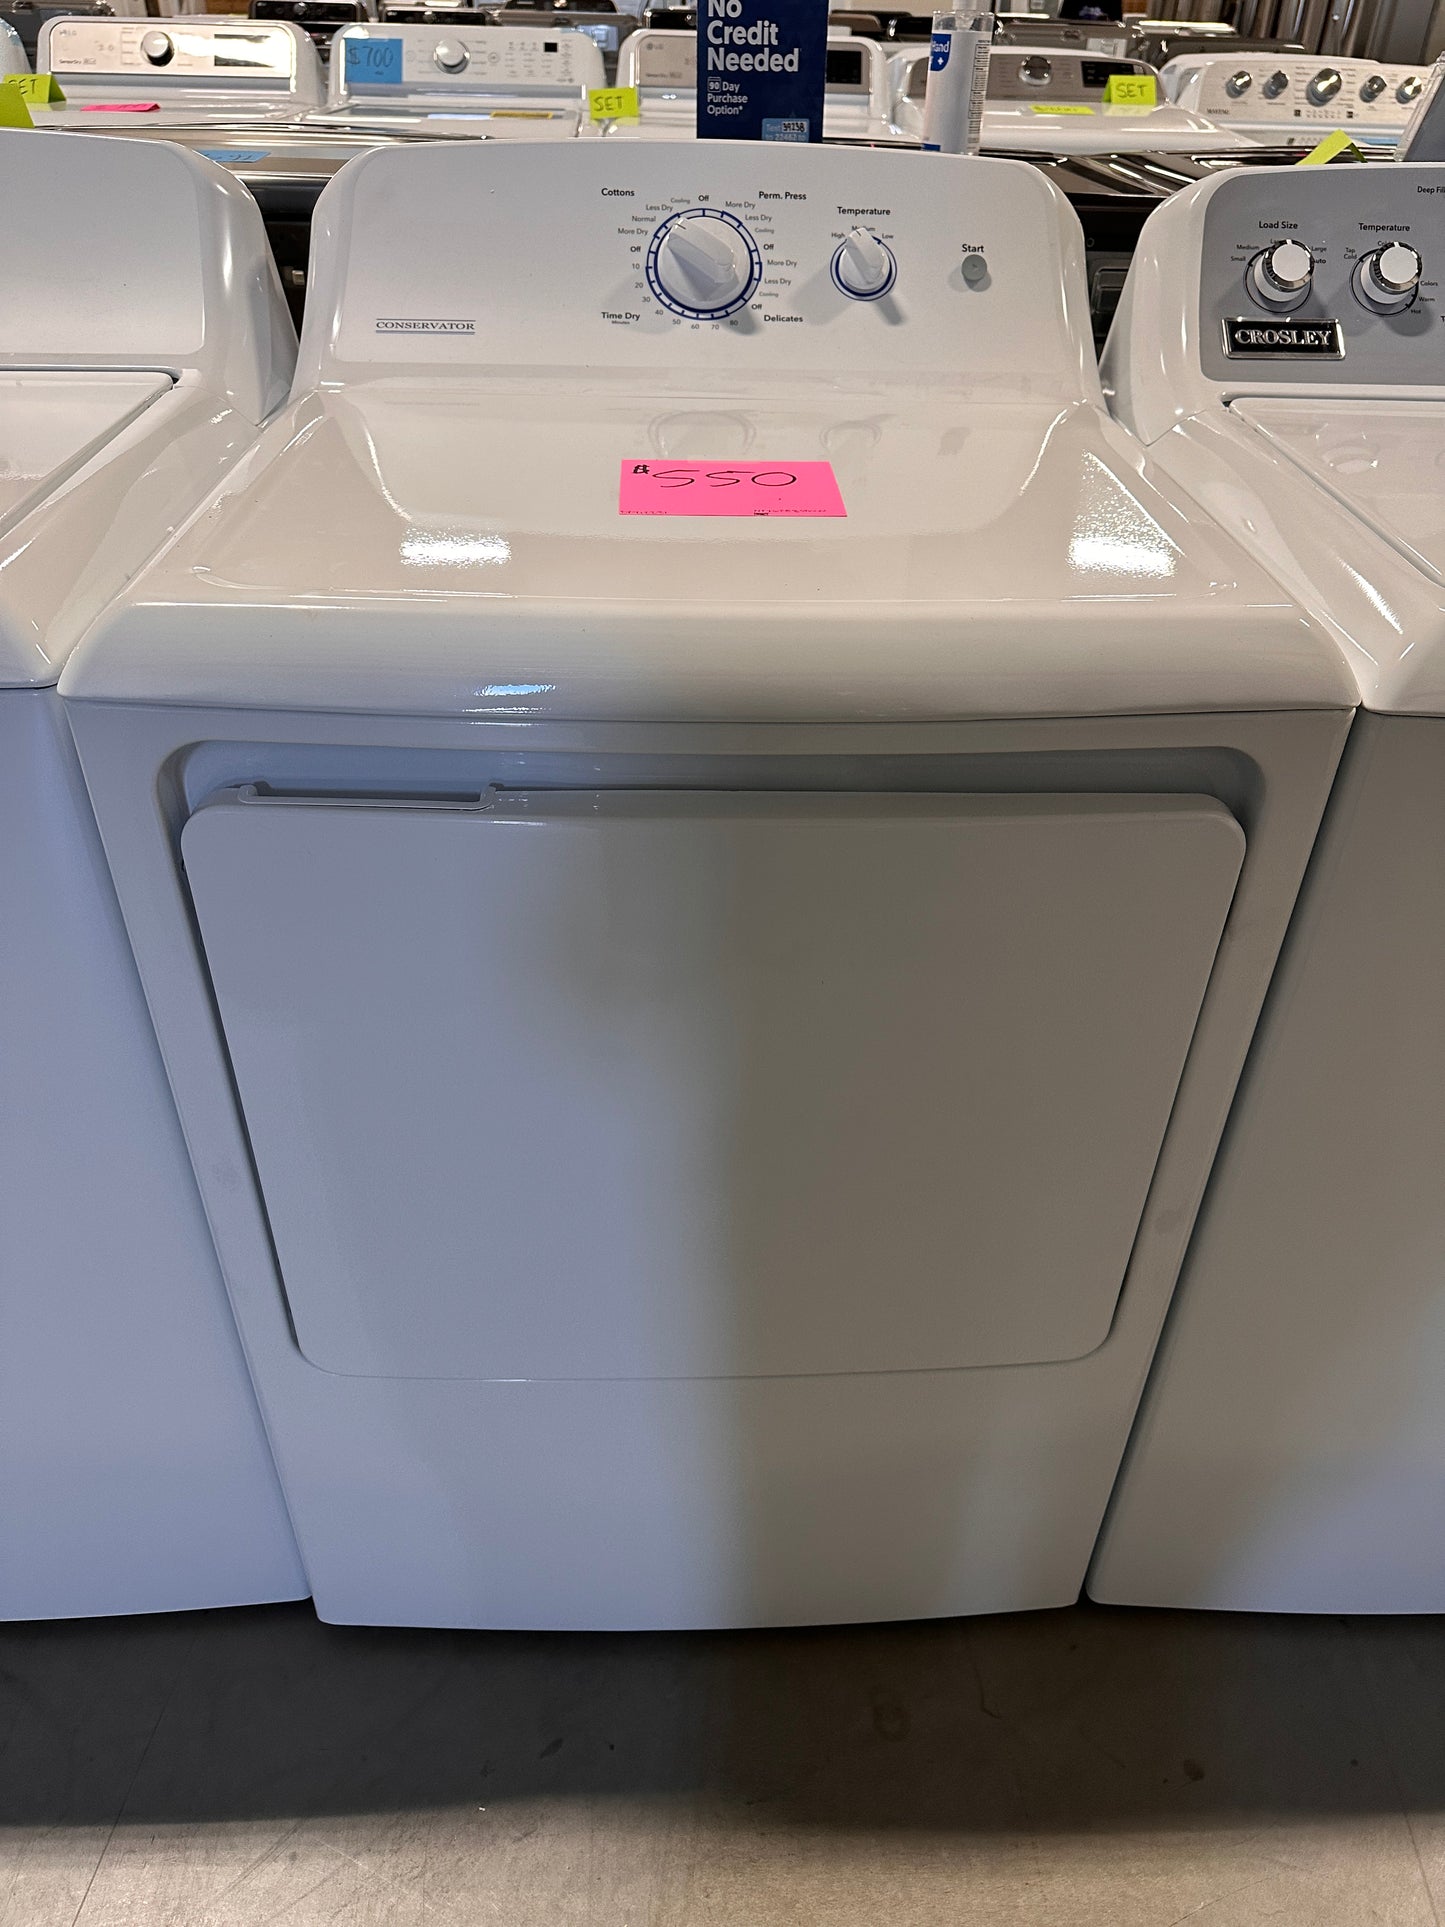 NEW LARGE CAPACITY ELECTRIC DRYER - DRY12231 NTX62E8STWW